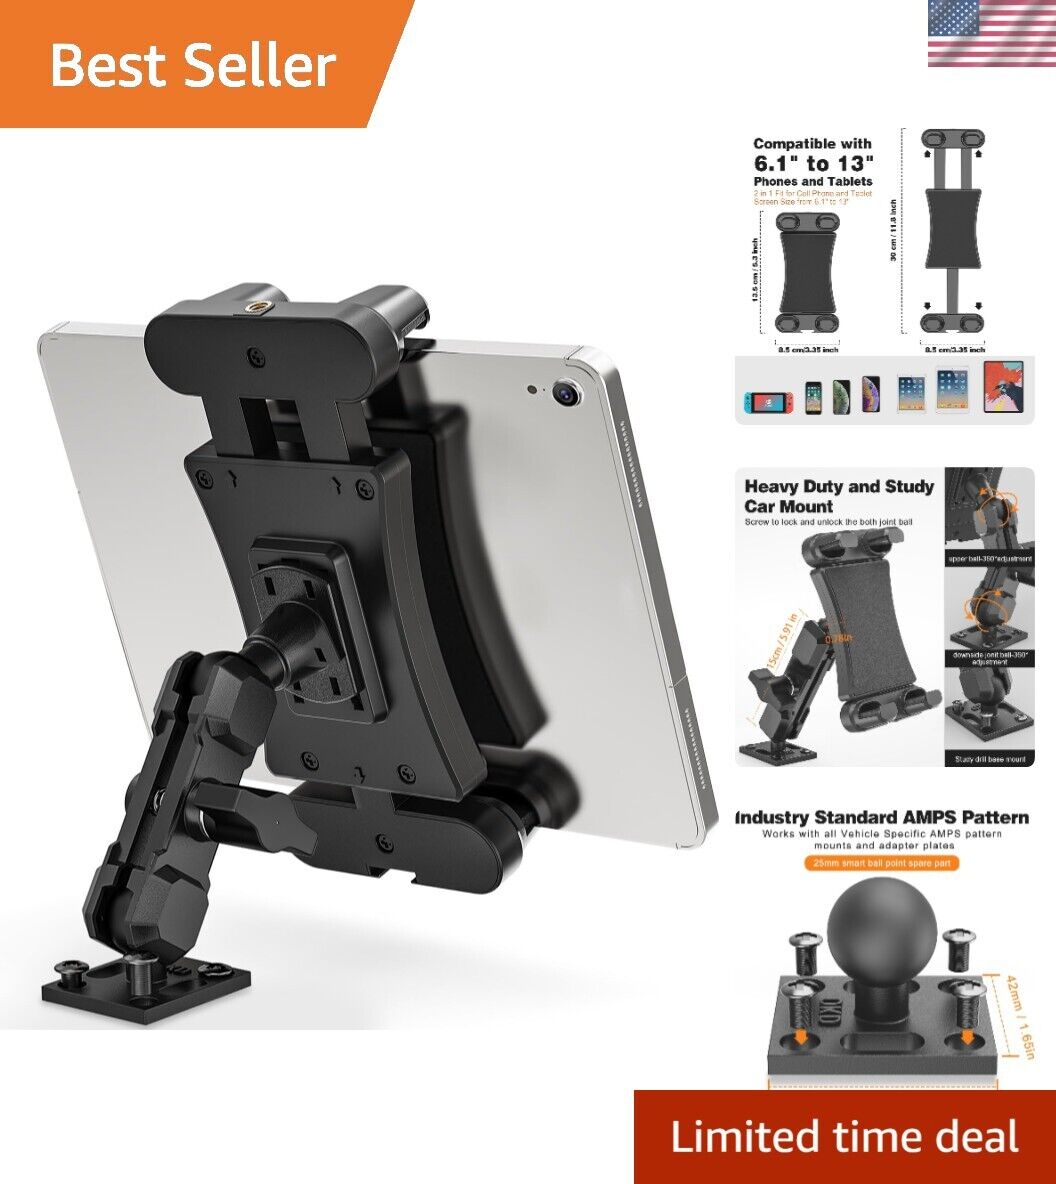 Professional Grade Tablet Stand with Adjustable Swivel for Commercial Vehicles